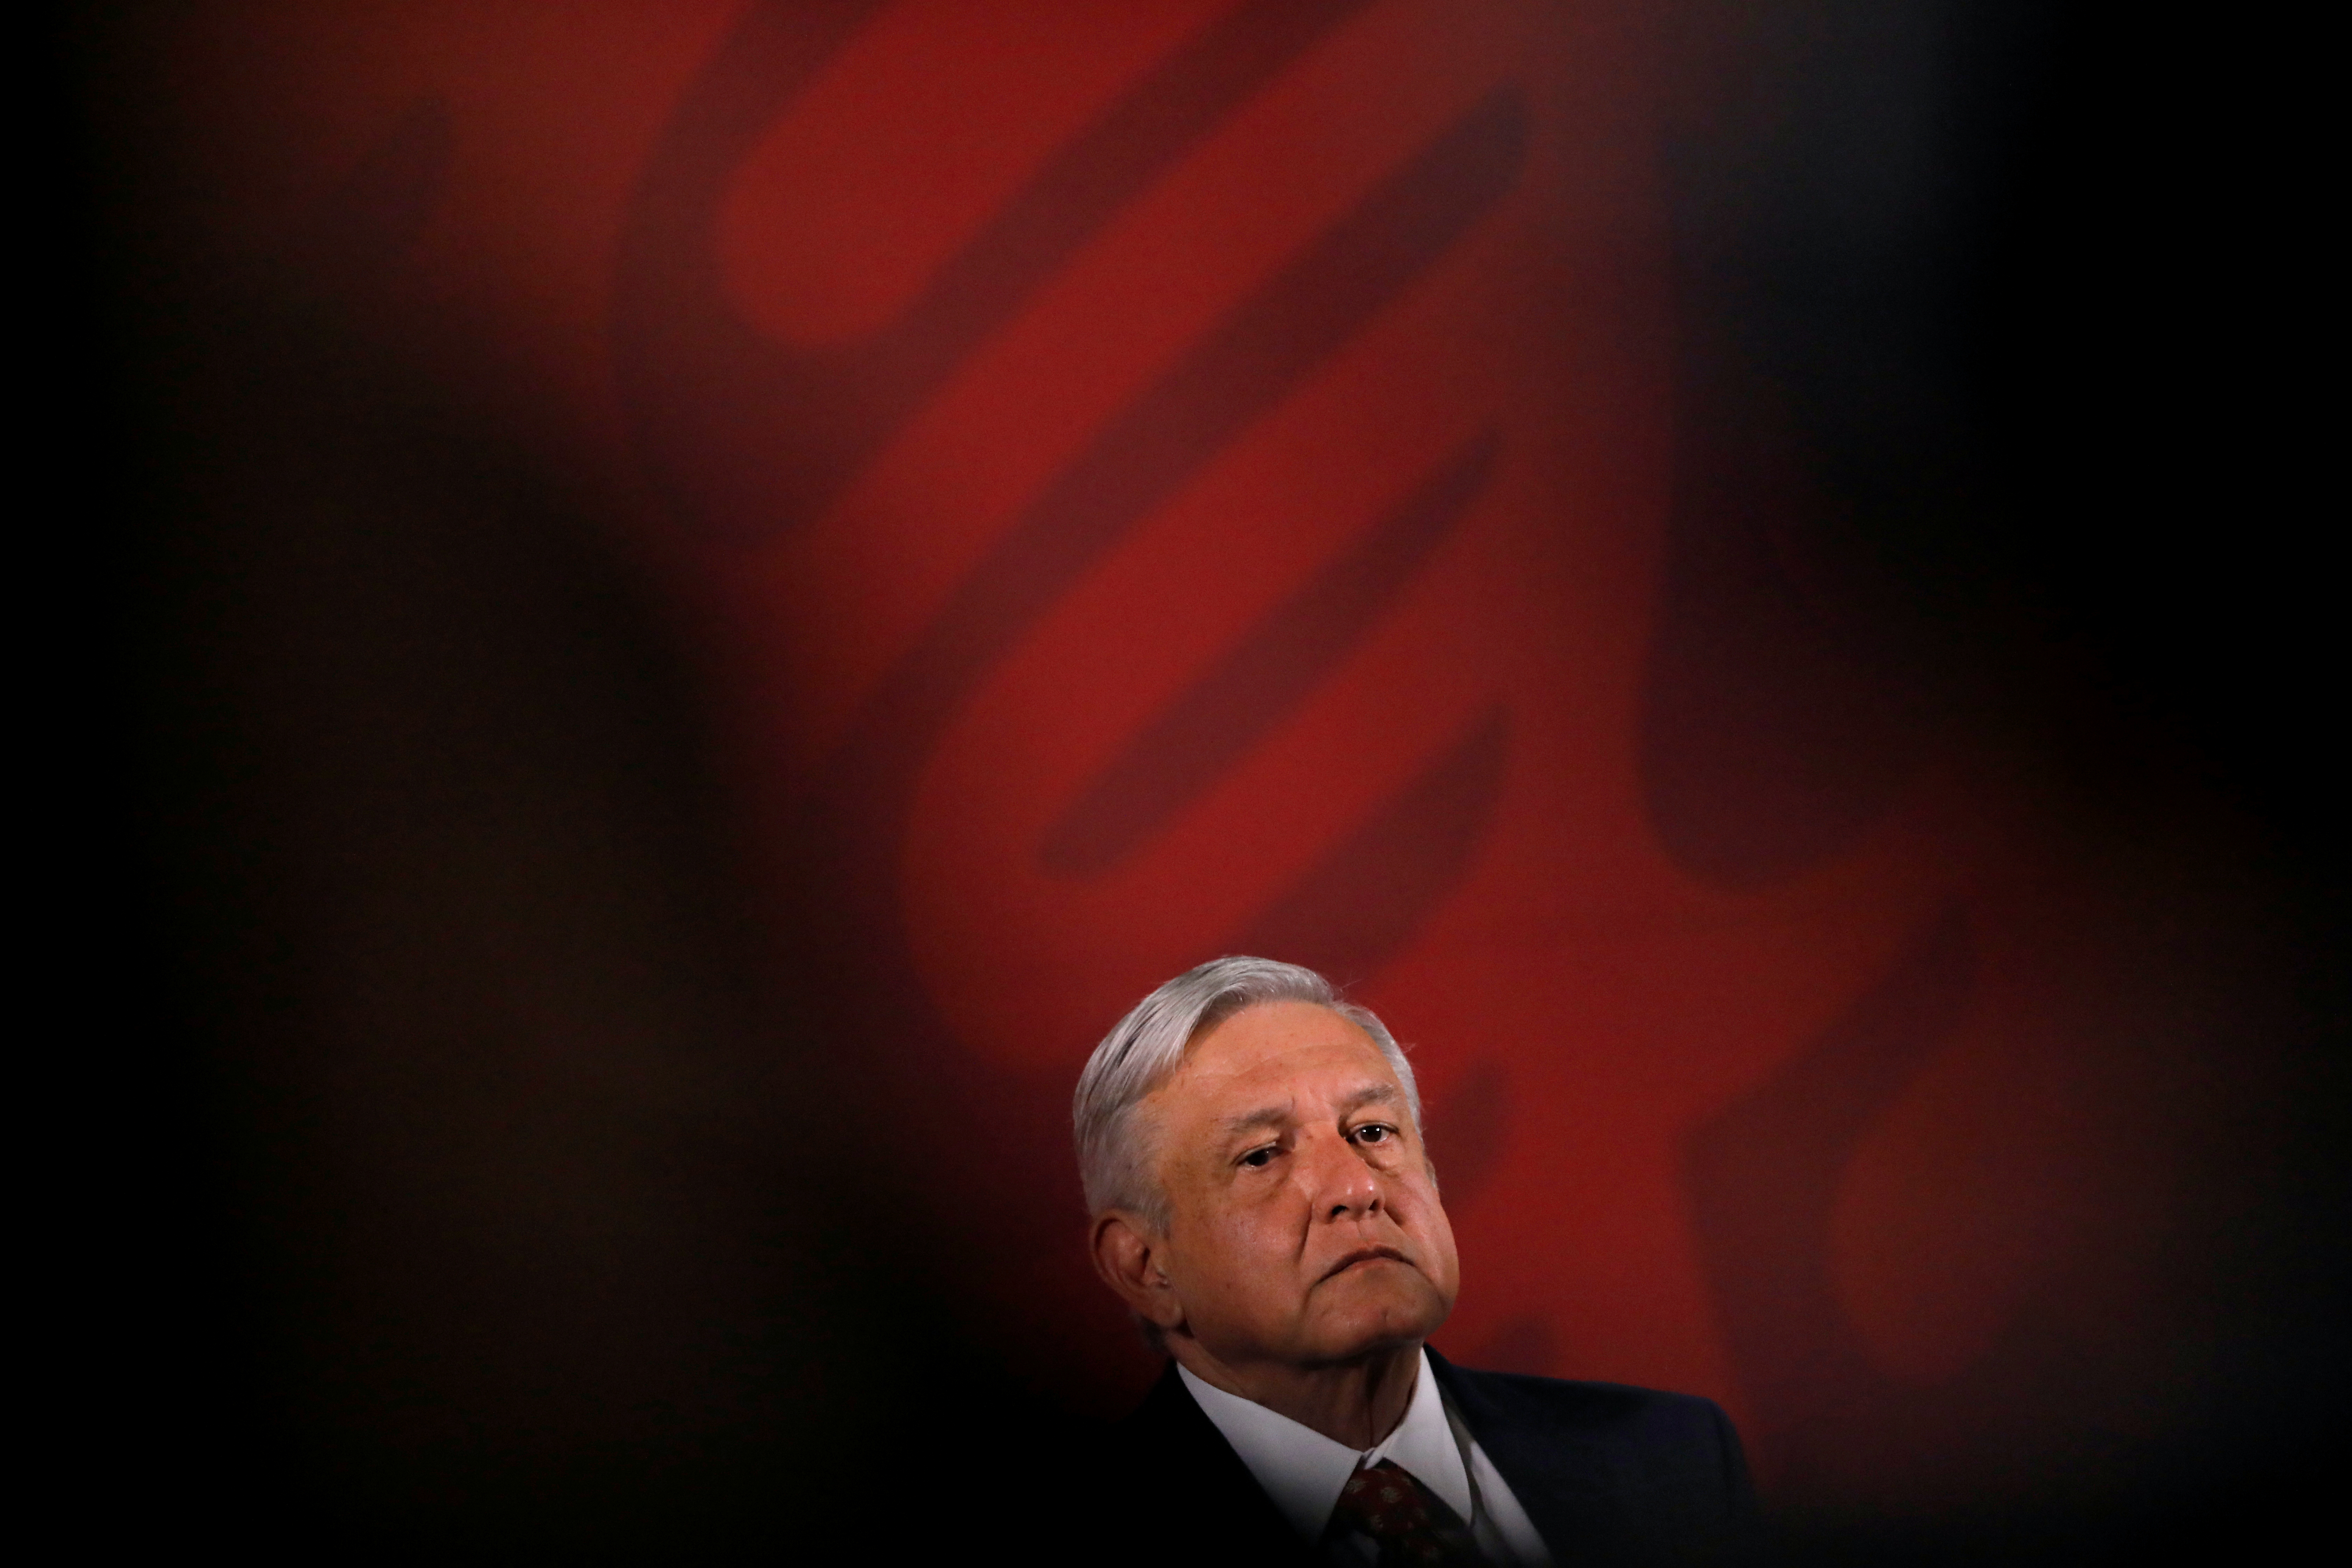 AMLO assured that Mexico is not hell, despite the violent days (Photo: REUTERS/Carlos Jasso)